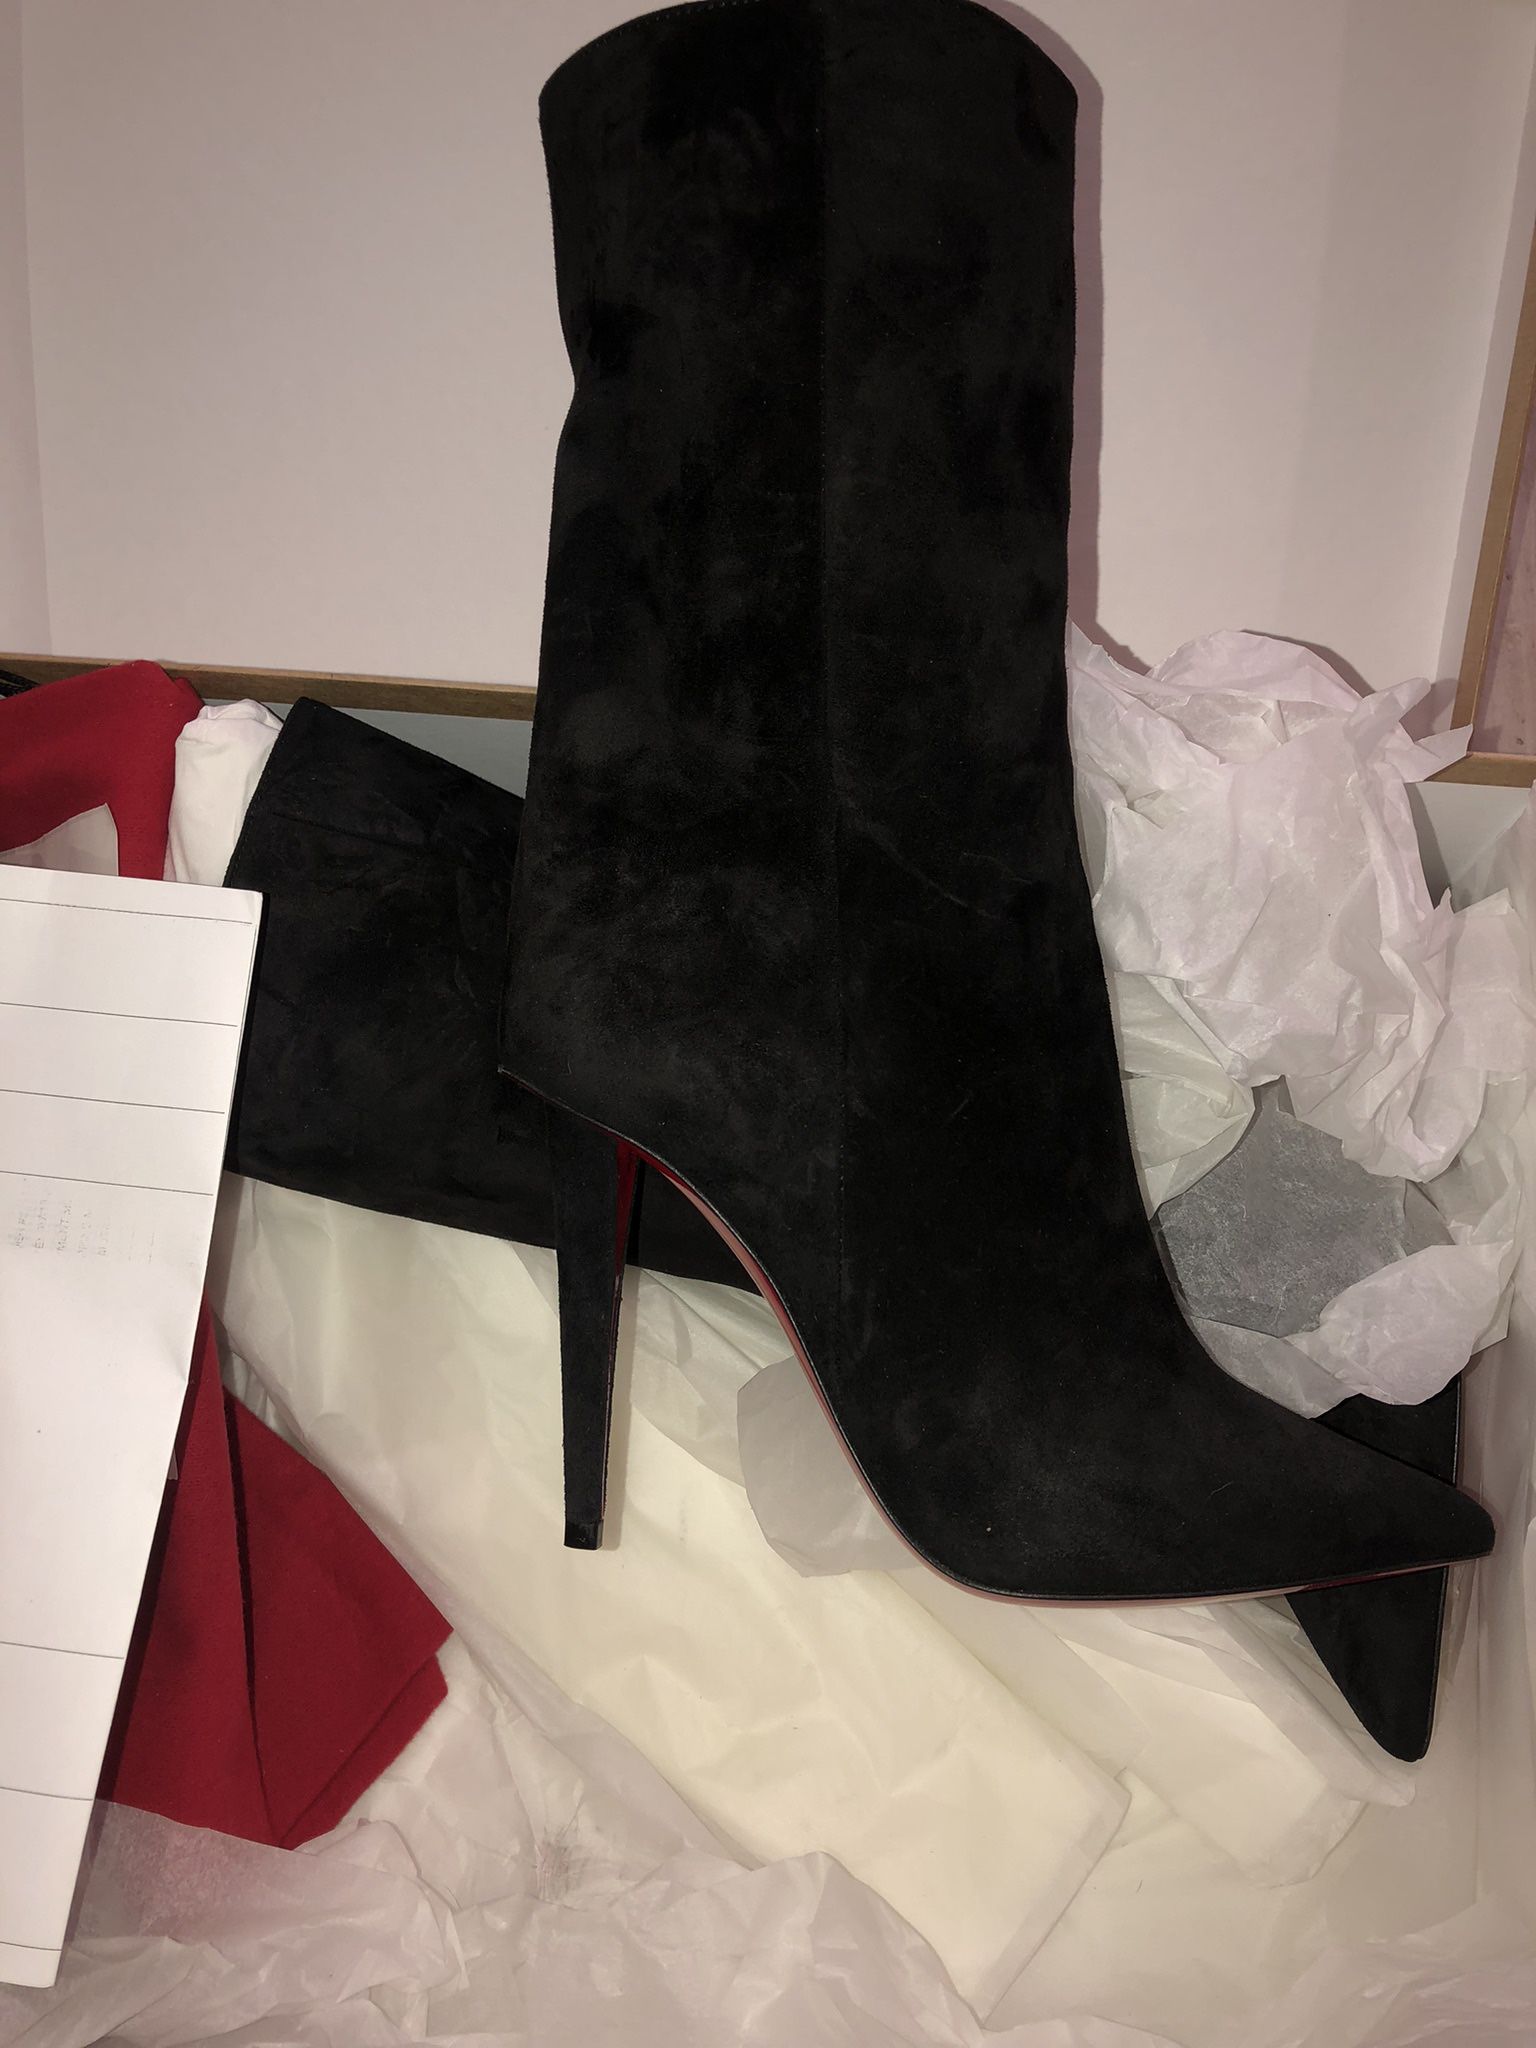 Christian Louboutin Black Suede Boots